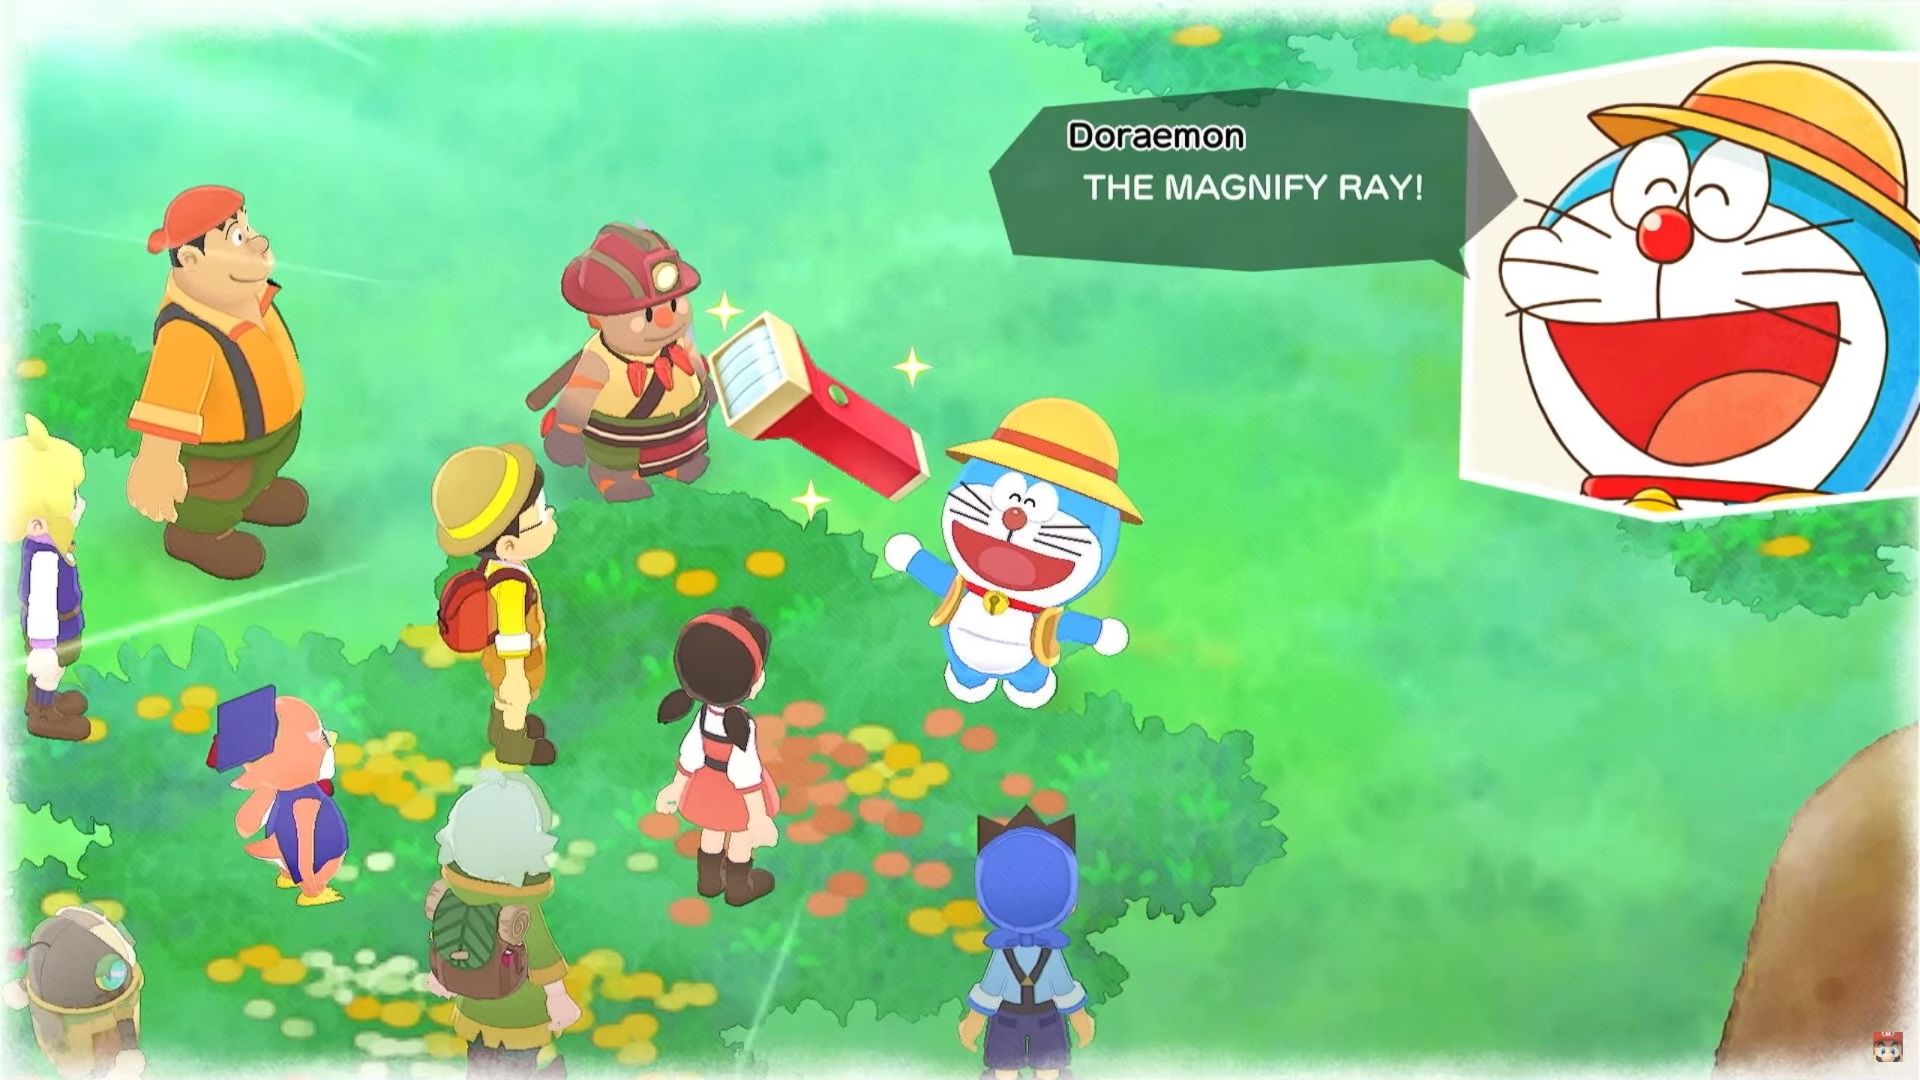 Doraemon showing off a gadget in Doraemon: Story of Seasons - Friends of the Great Kingdom in today's Nintendo Direct Mini